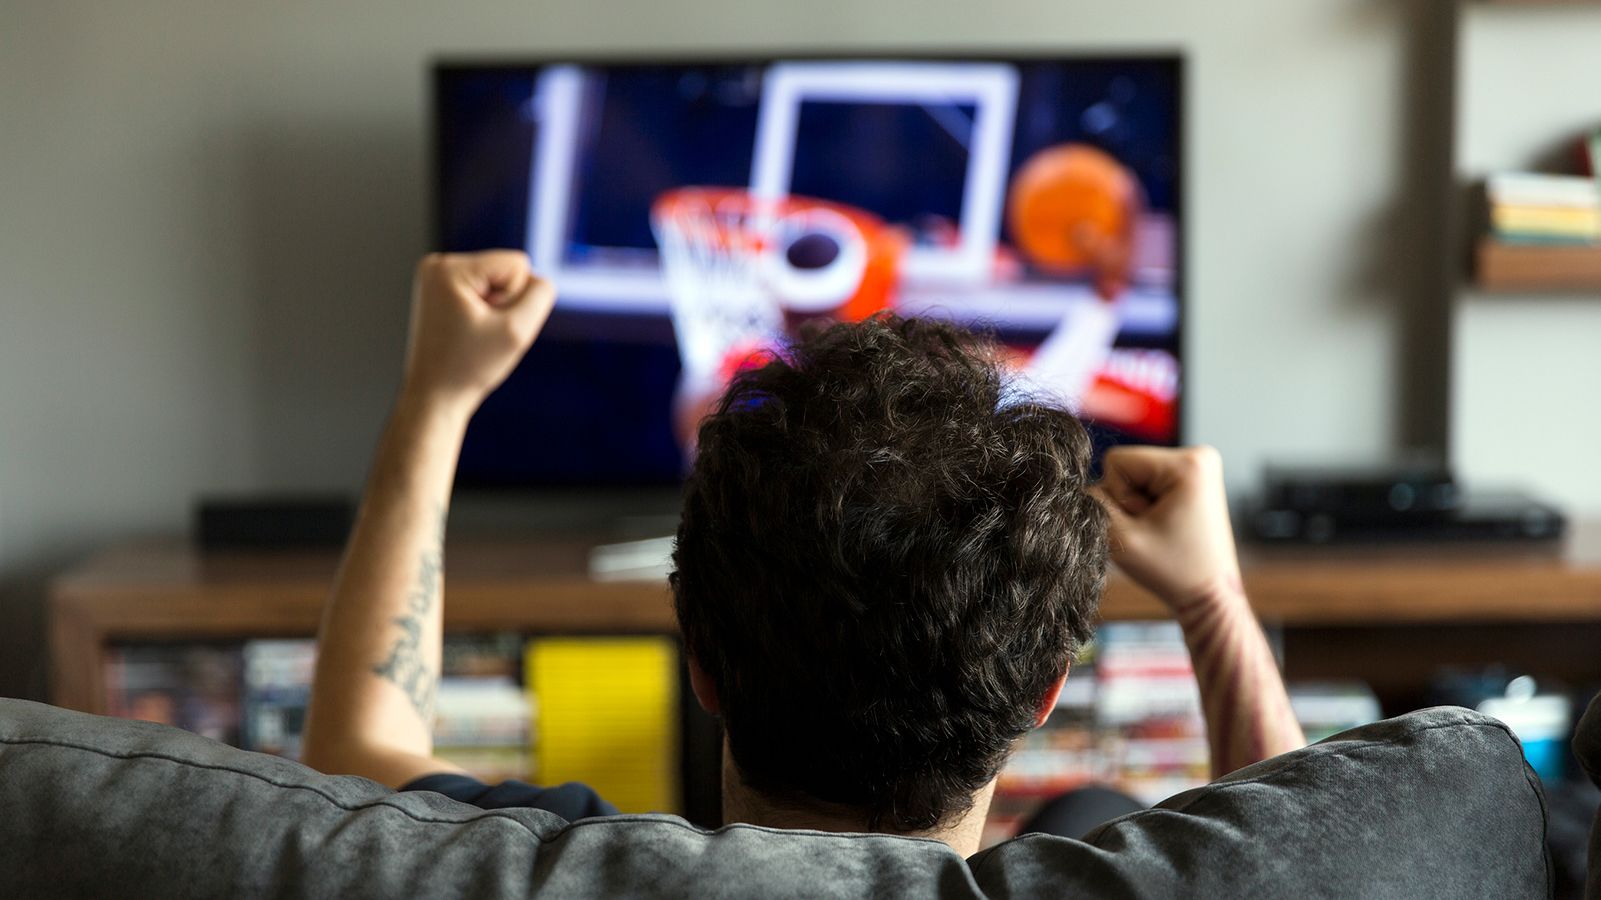 Get March Madness ready with these deals on Amazon Fire TV devices | CNN Underscored